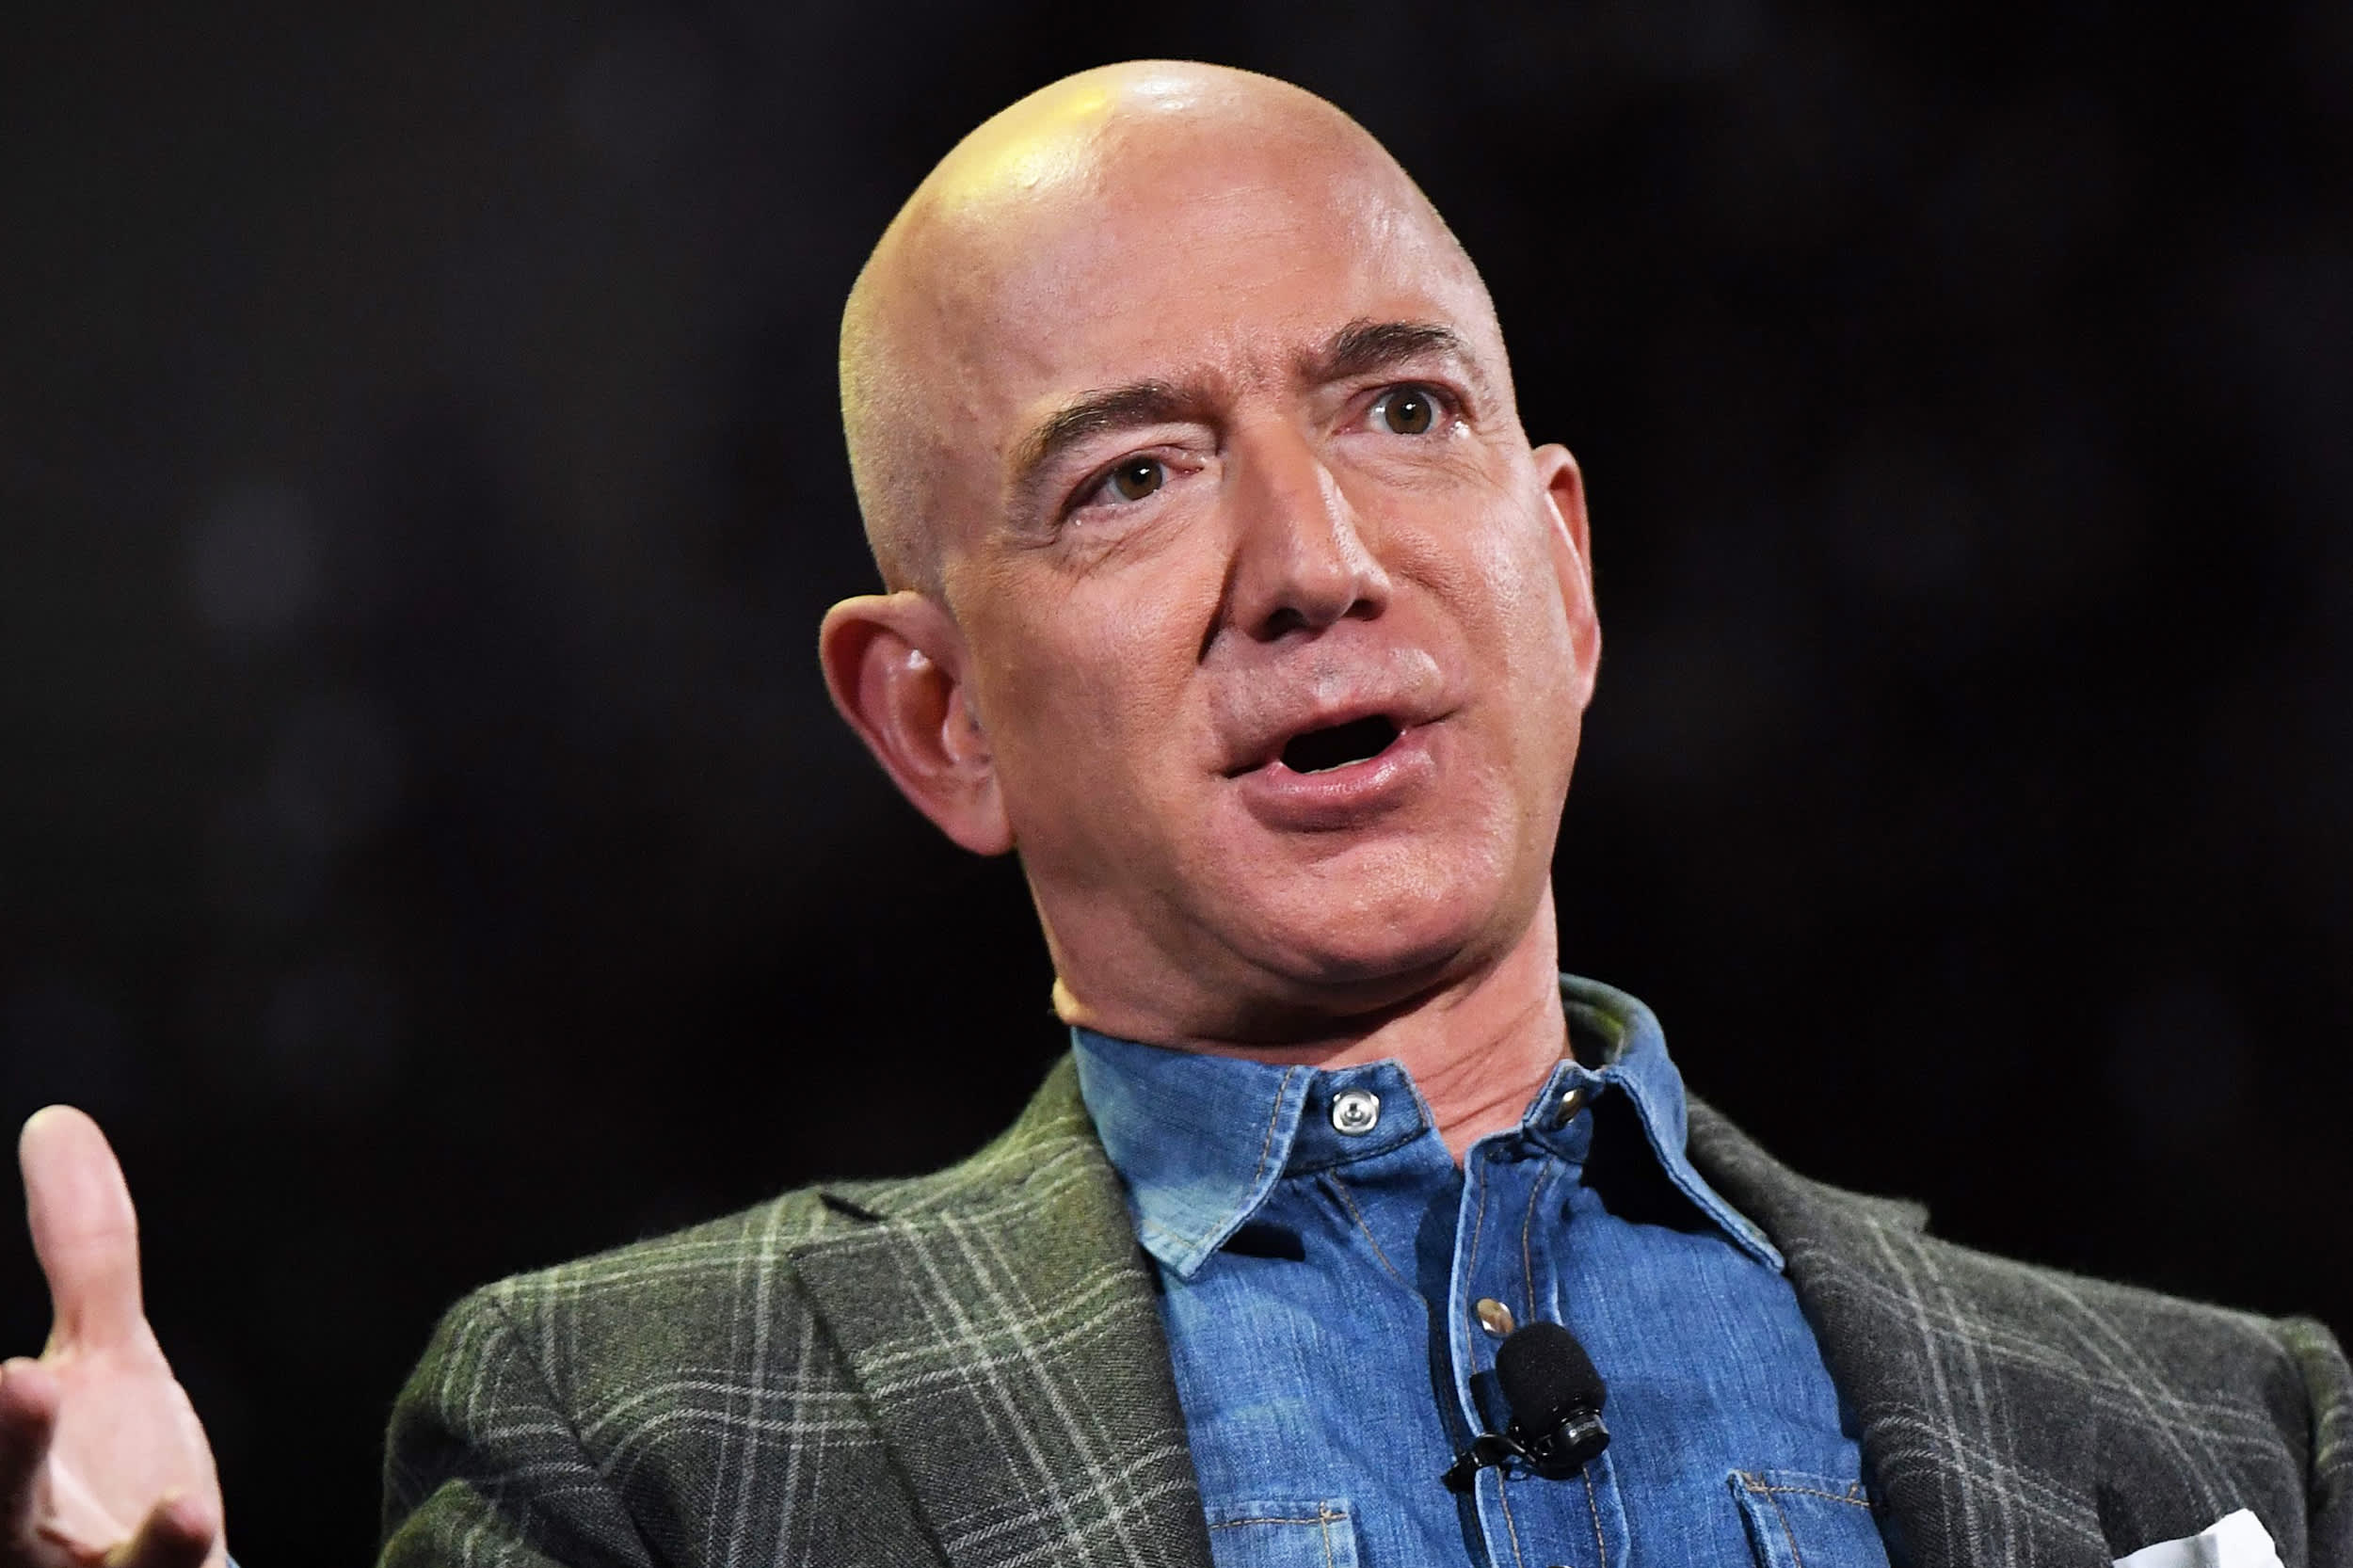 Jeff Bezos to step down as CEO of Amazon, Andy Jassy to take over in the third quarter